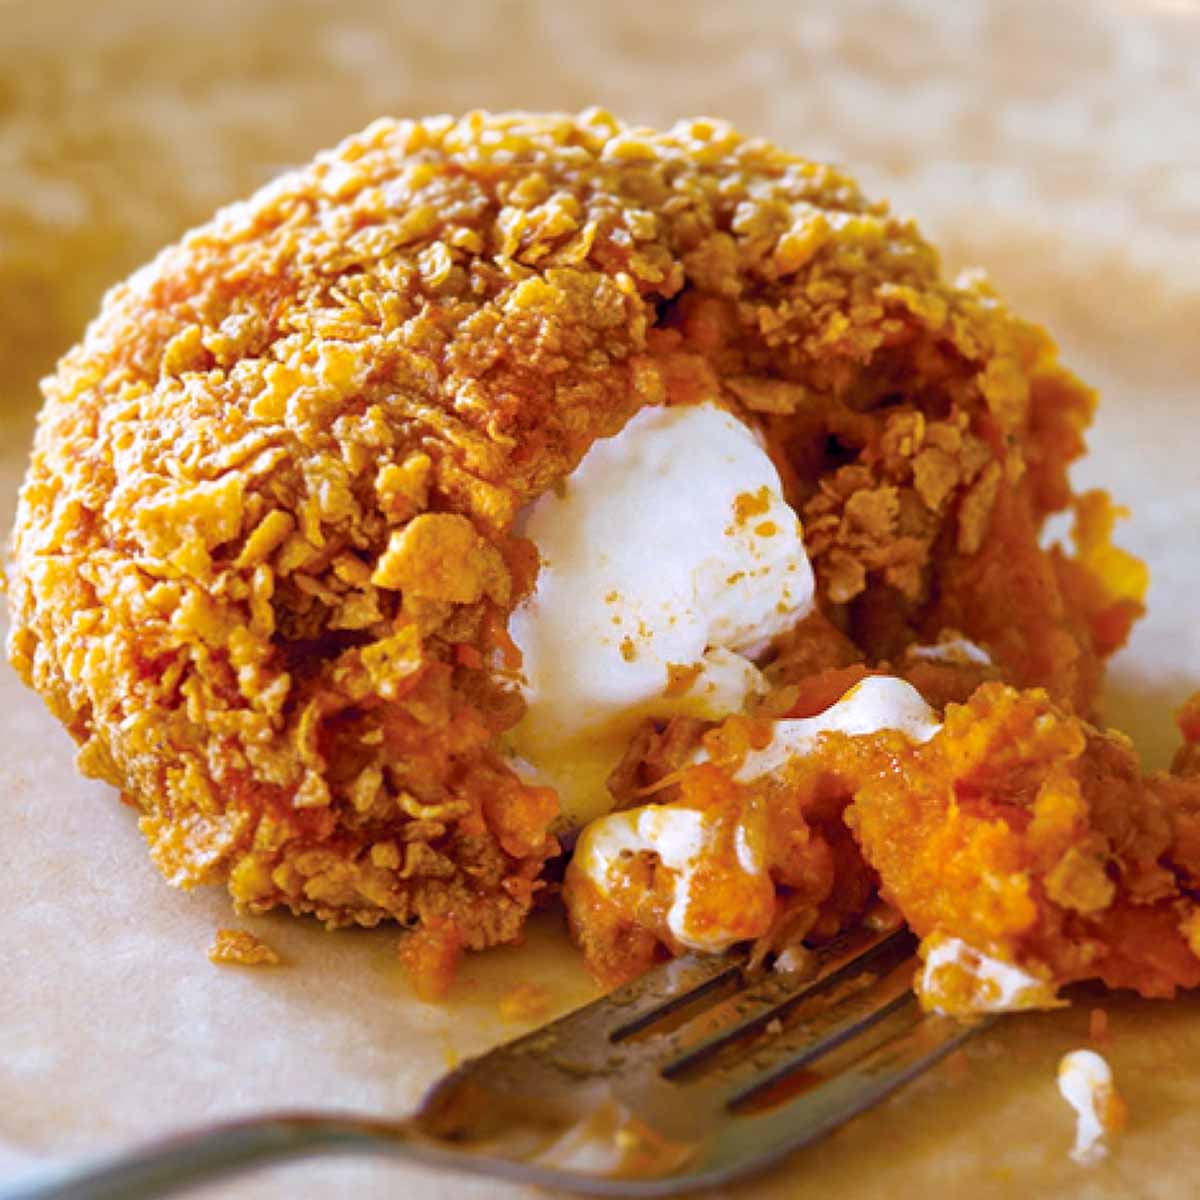 An inside-out sweet potato coated in corn flakes, with a marshmallow center.